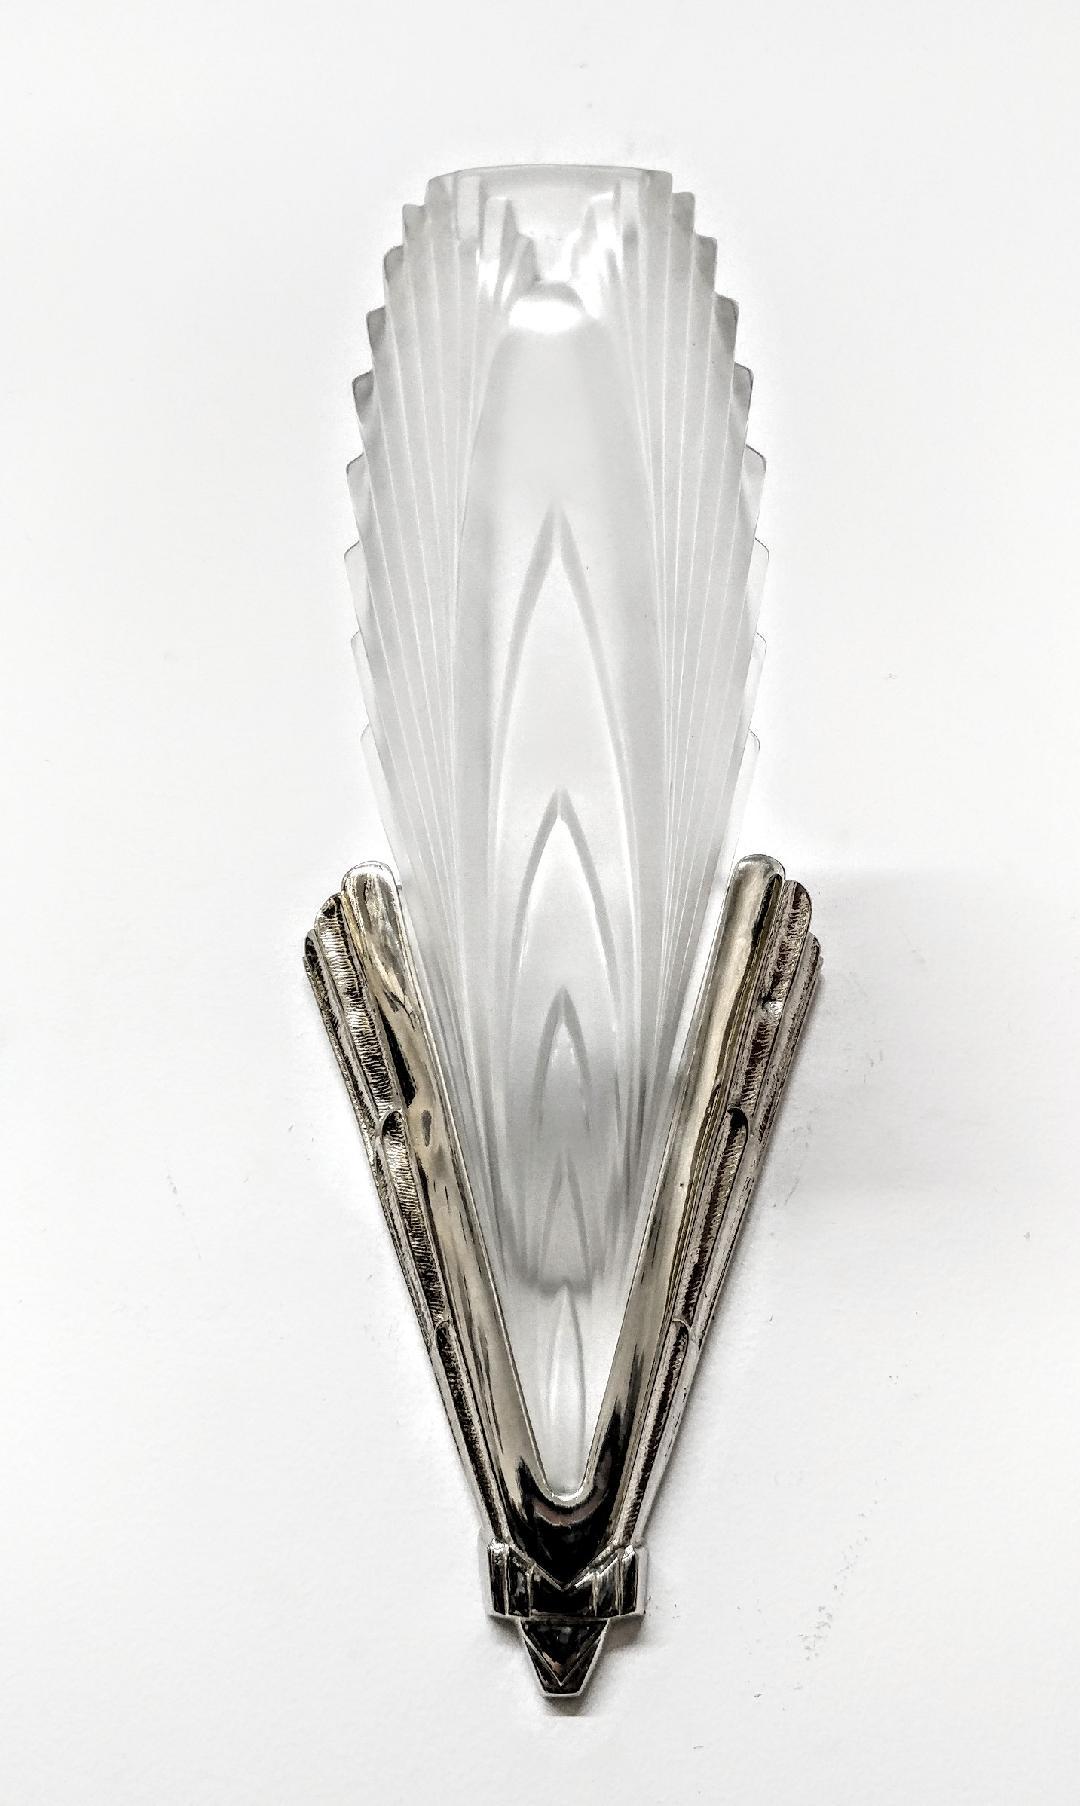 A pair of French Art Deco wall sconces in great condition. In clear frosted molded glass shades in a feather motif design held by matching bronze brackets. Sconces have been re-plated in nickel and rewired for U.S. standards. Each sconce